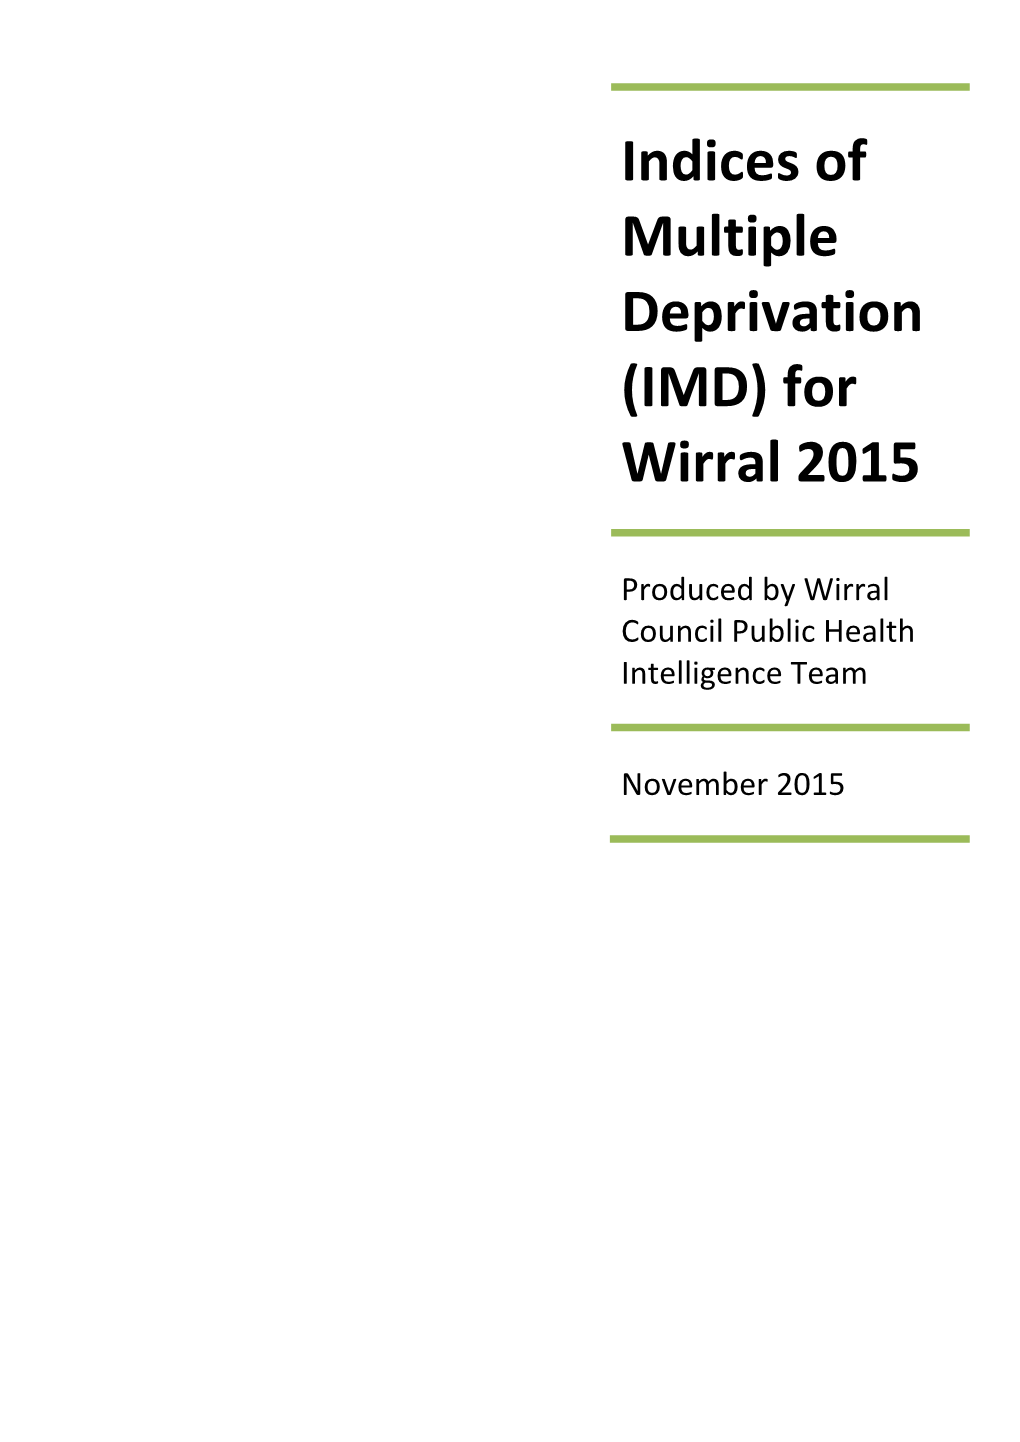 Indices of Multiple Deprivation (IMD) for Wirral 2015